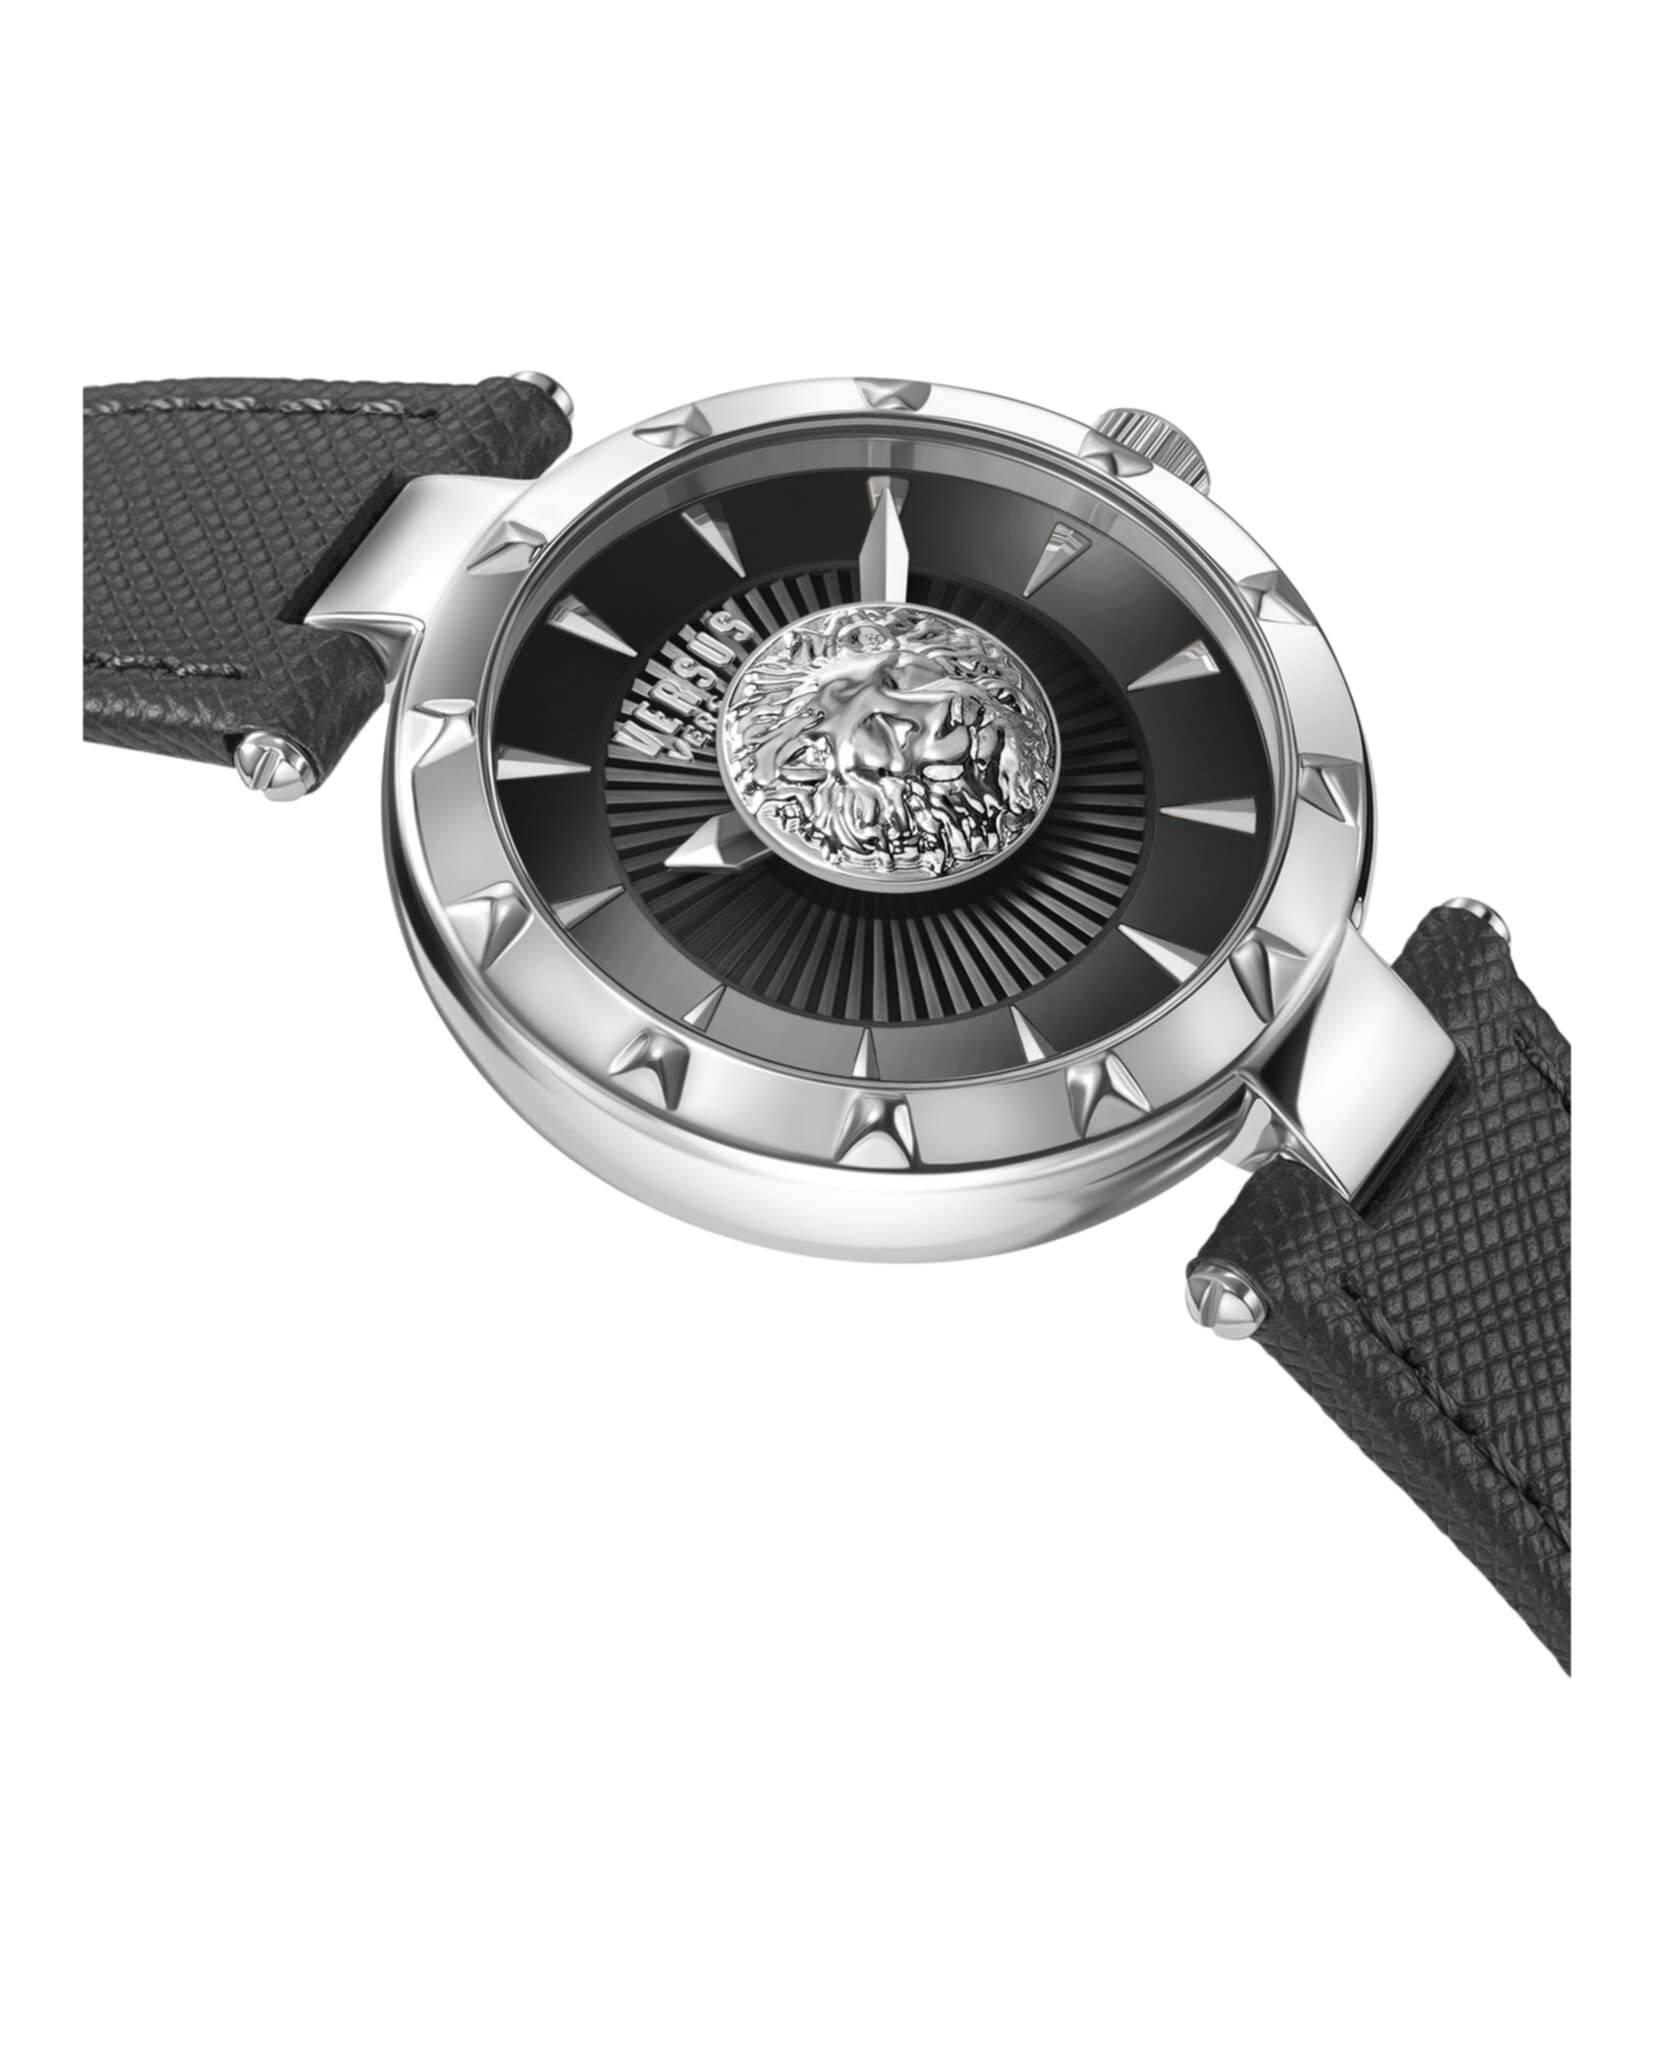 Versus Versace Sertie Collection Luxury Womens Watch Timepiece with a Black Strap Featuring a Stainless Steel Case and Black Dial